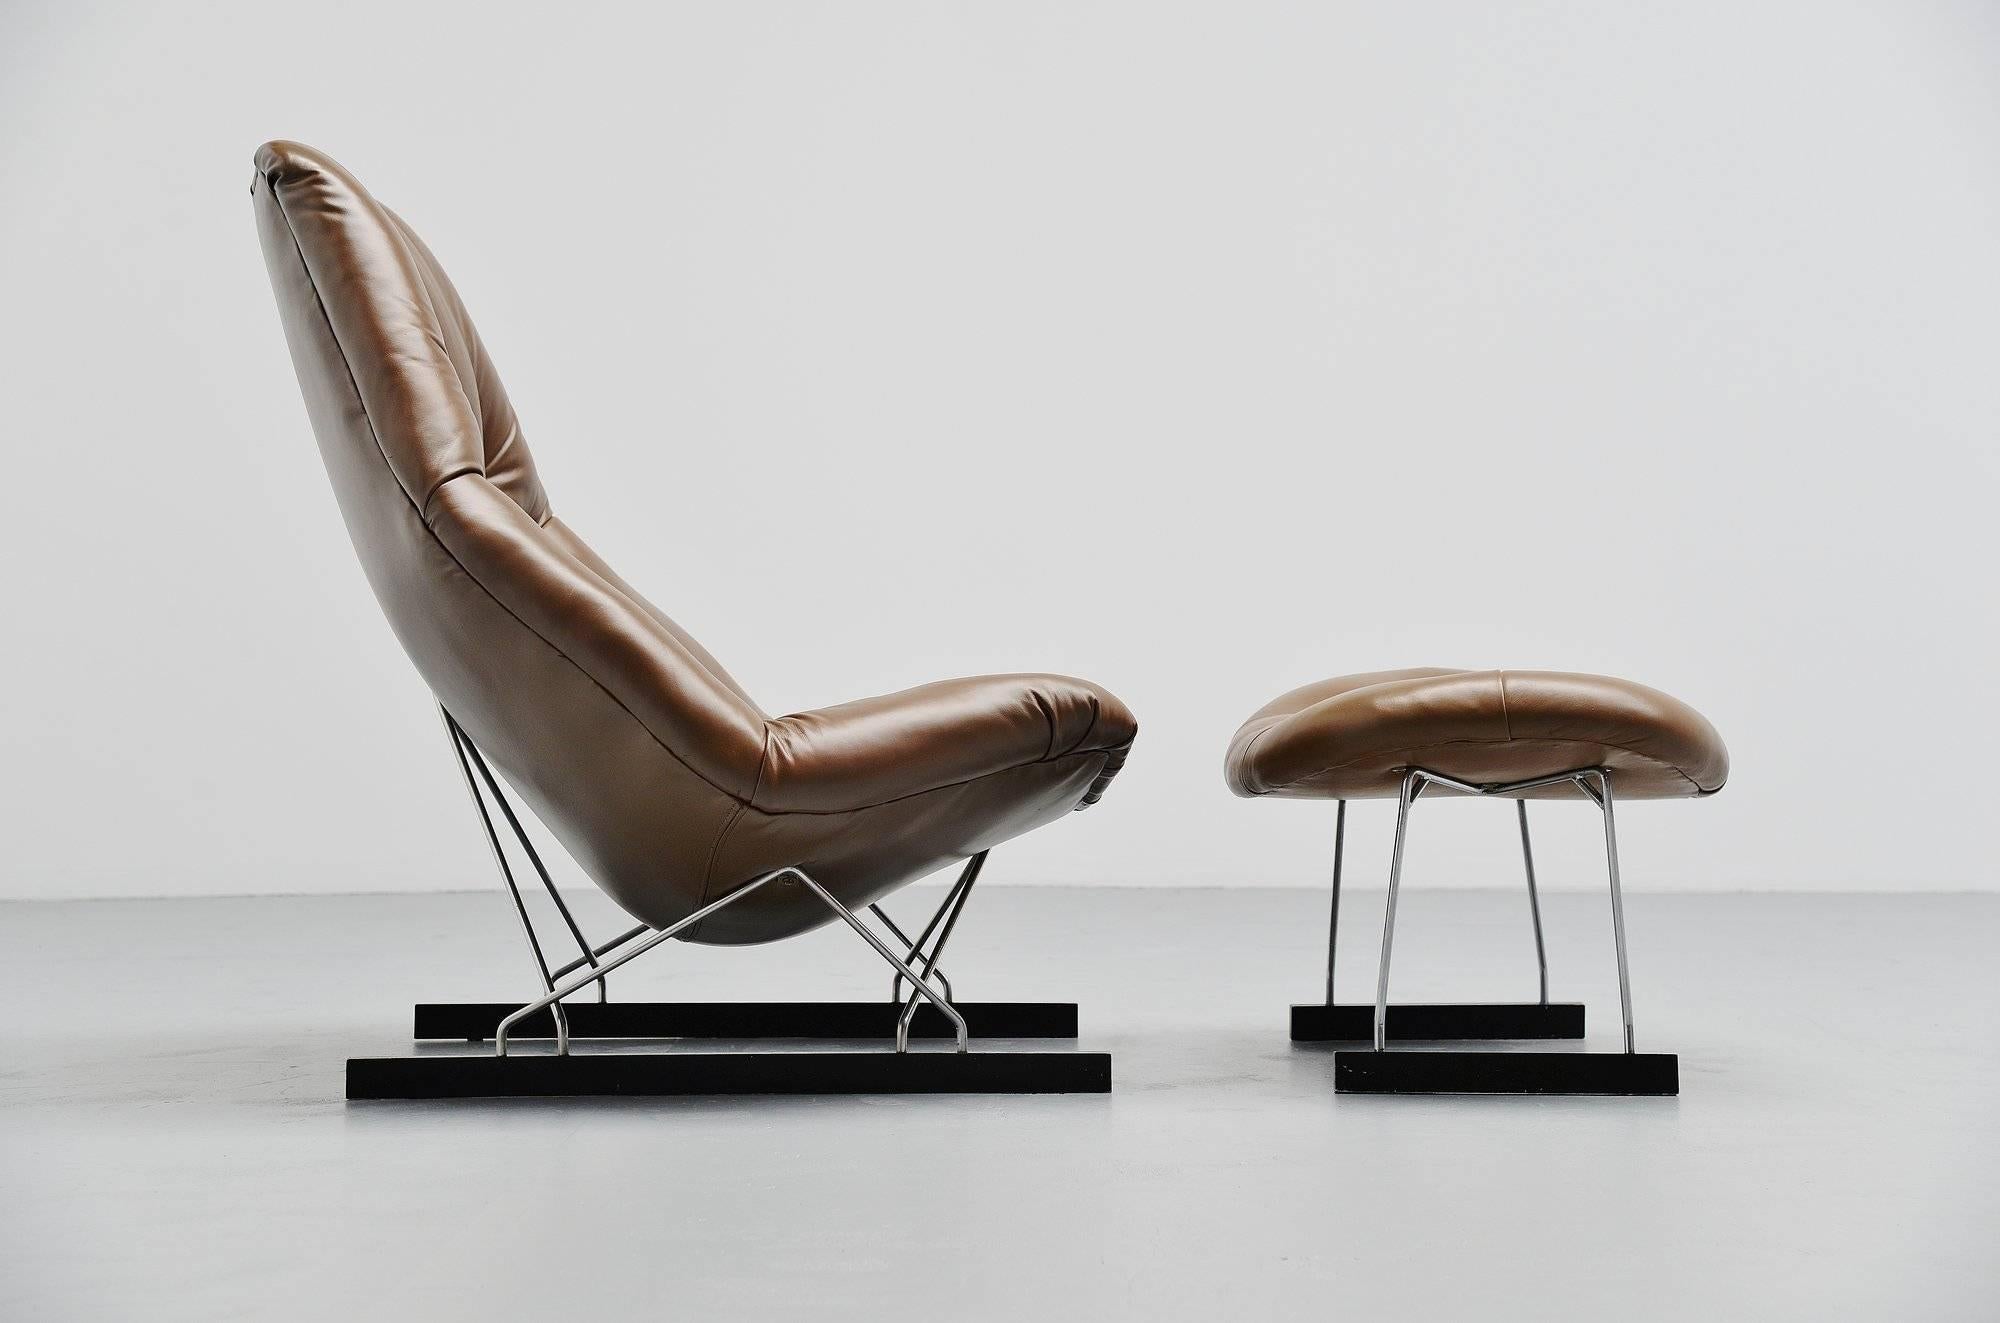 Ultra rare lounge chair designed by Geoffrey D. Harcourt and manufactured by Artifort, Holland, 1966. This chair is only produced for a very short period from 1966-1969 and there were not more than 100 examples produced from this chair, exact number